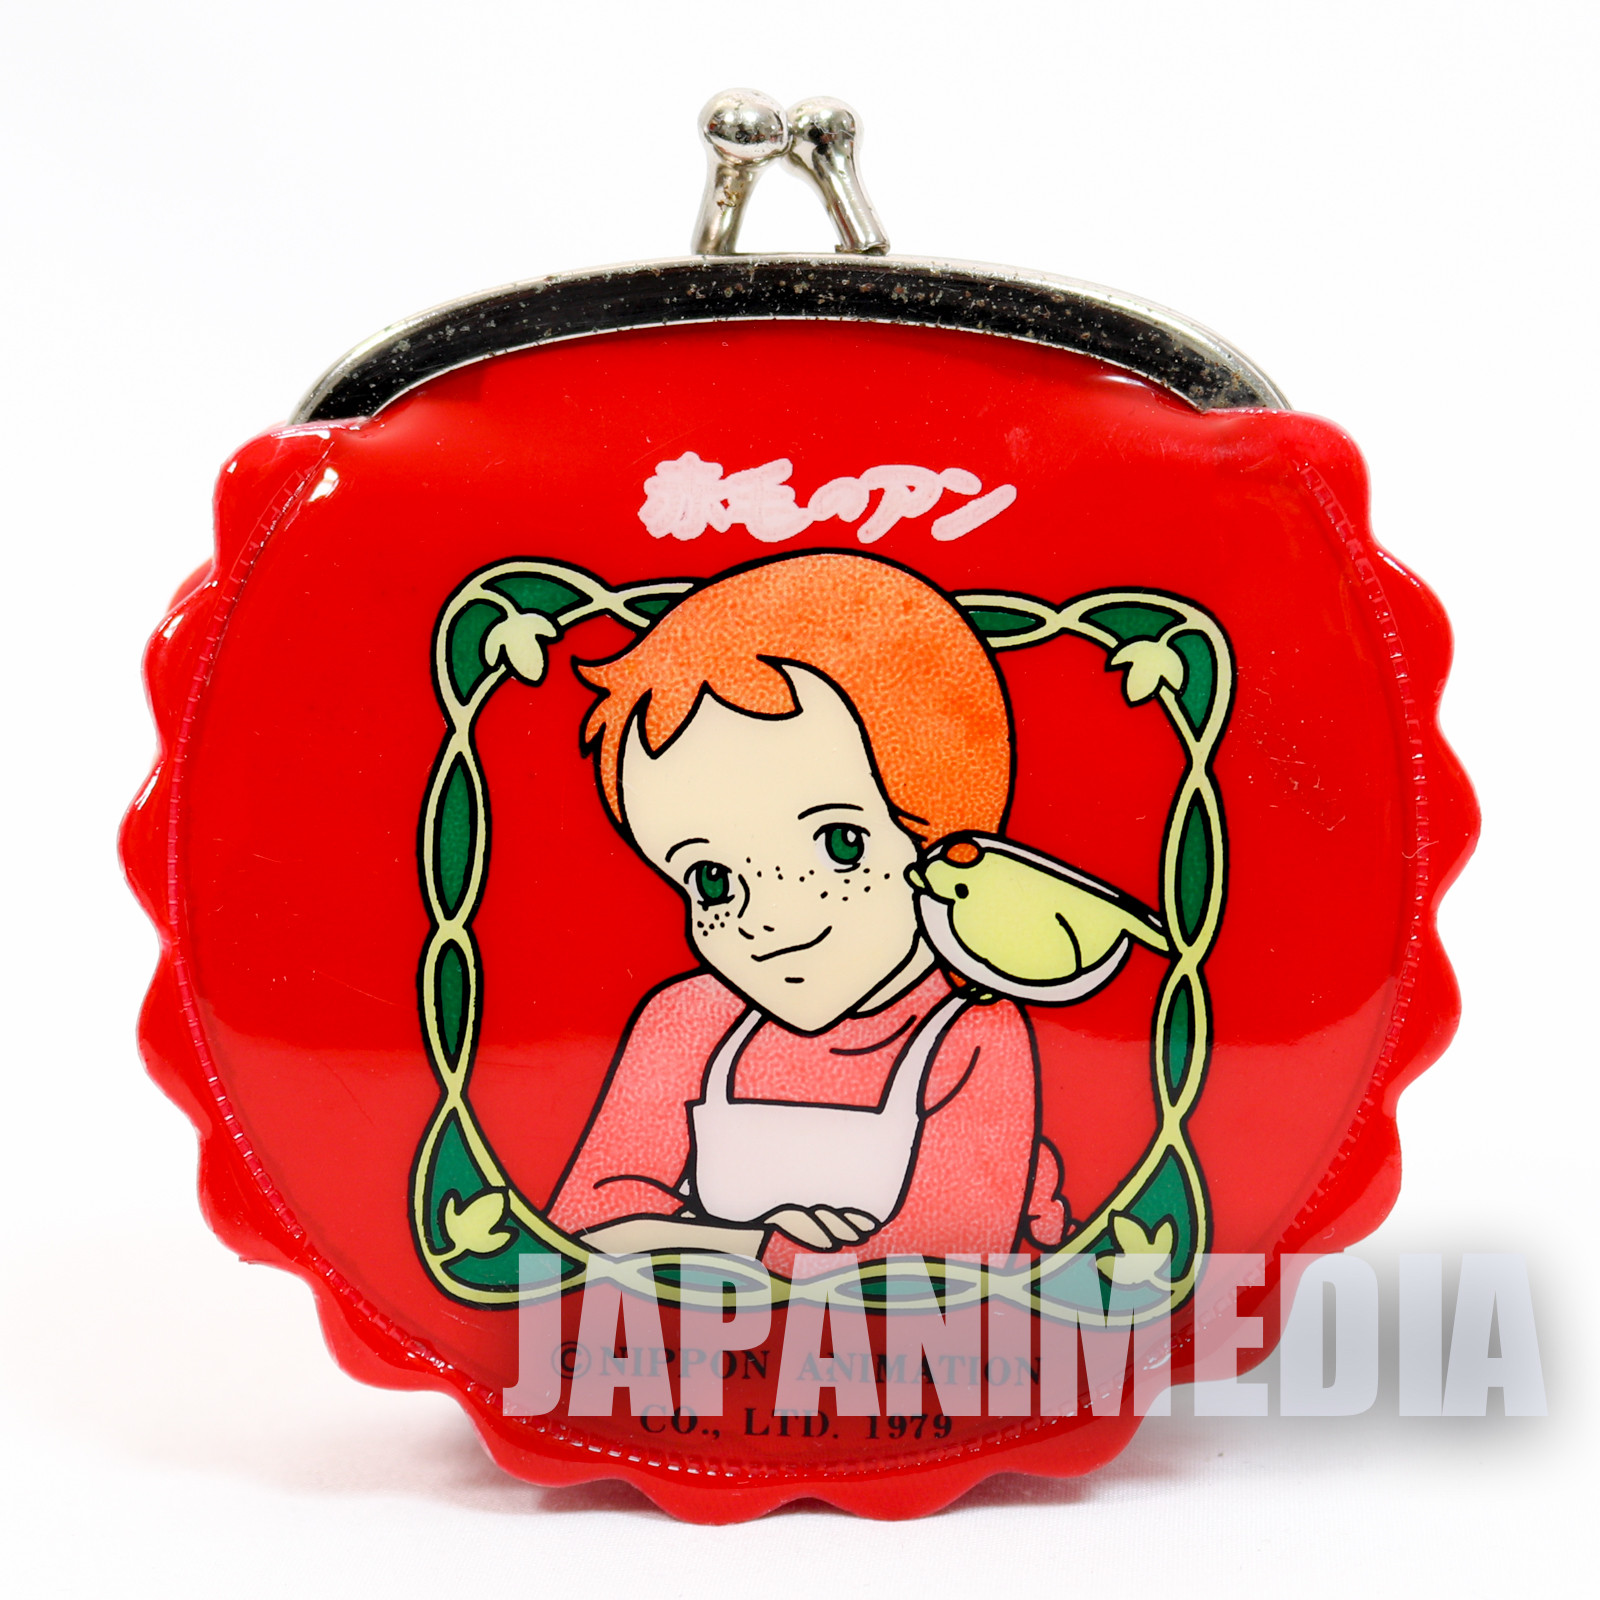 Retro! Anne of Green Gables Purse with a Clasp Coin Case Red #4 JAPAN ANIME